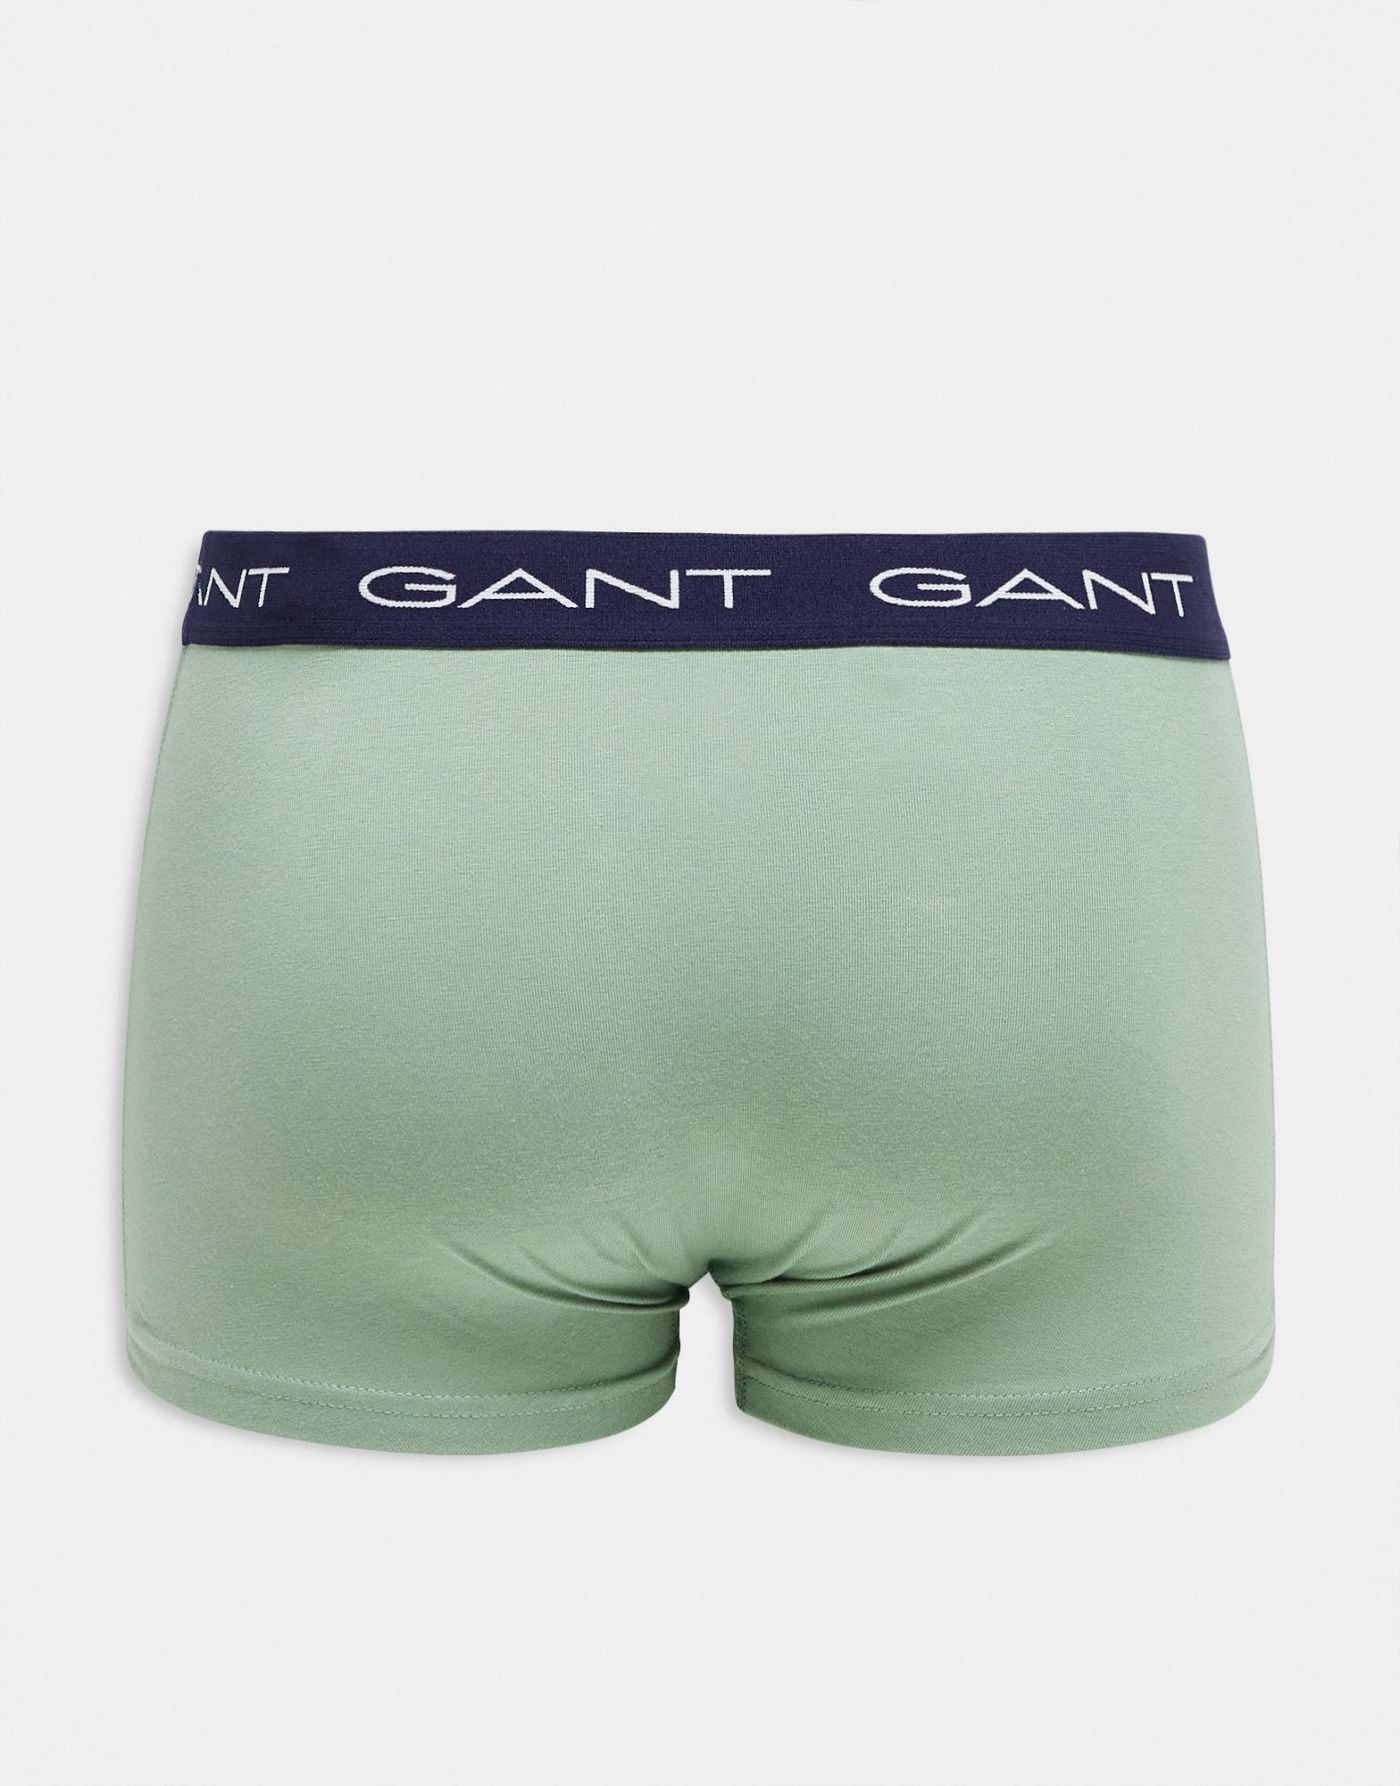 GANT 3 pack trunks in green, blue and orange with logo waistband